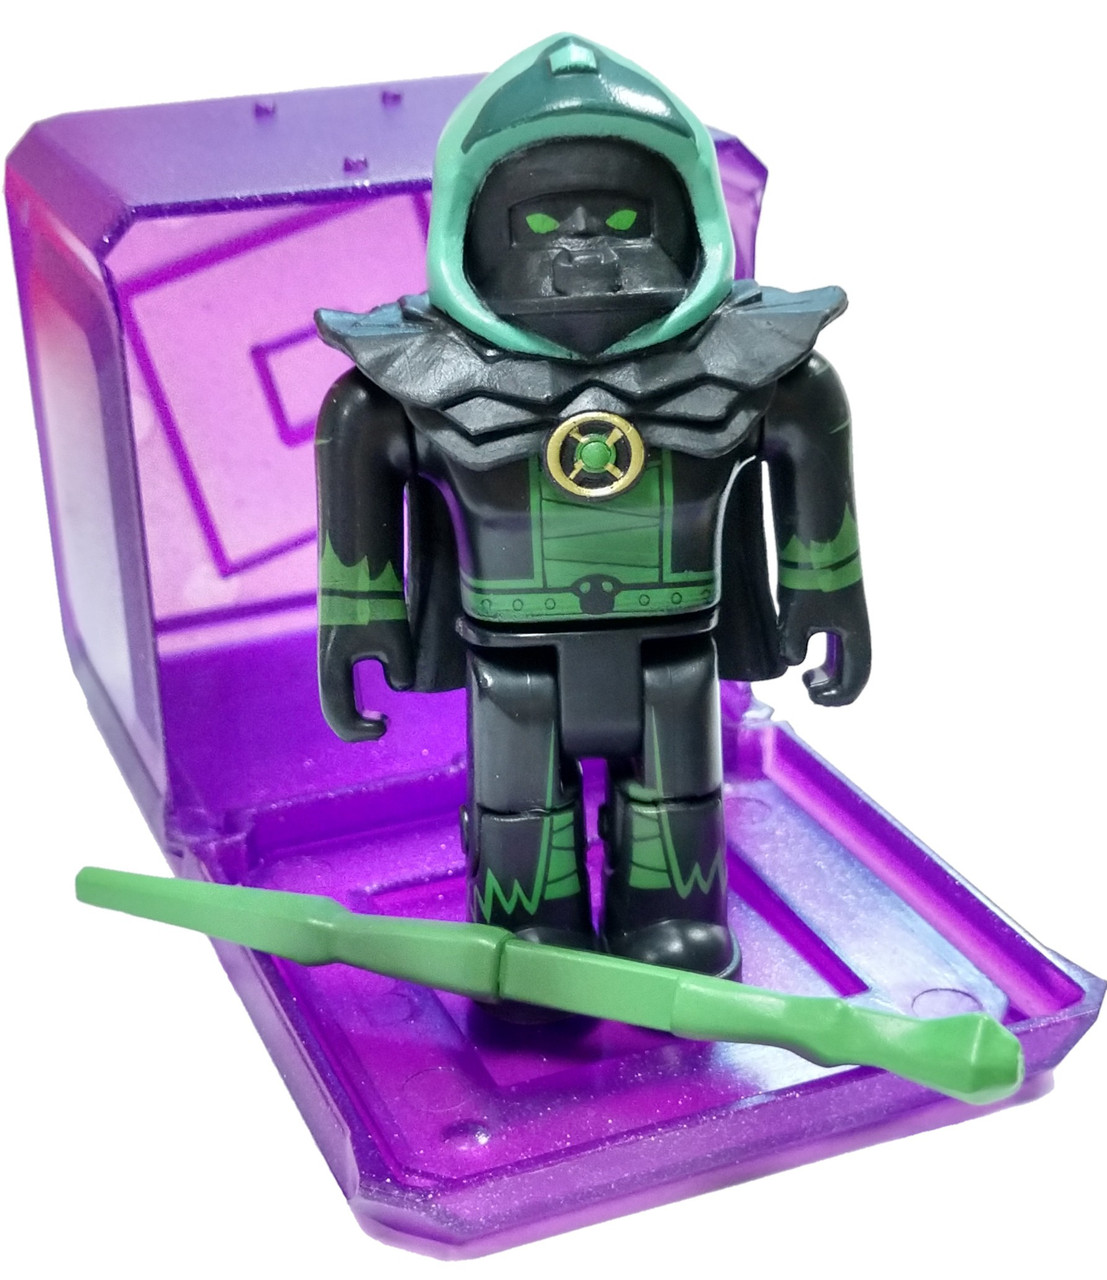 Roblox Celebrity Collection Series 3 Sethalonian 3 Mini Figure With Cube And Online Code Loose Jazwares Toywiz - details about roblox series 3 with code box book of monsters minotaur